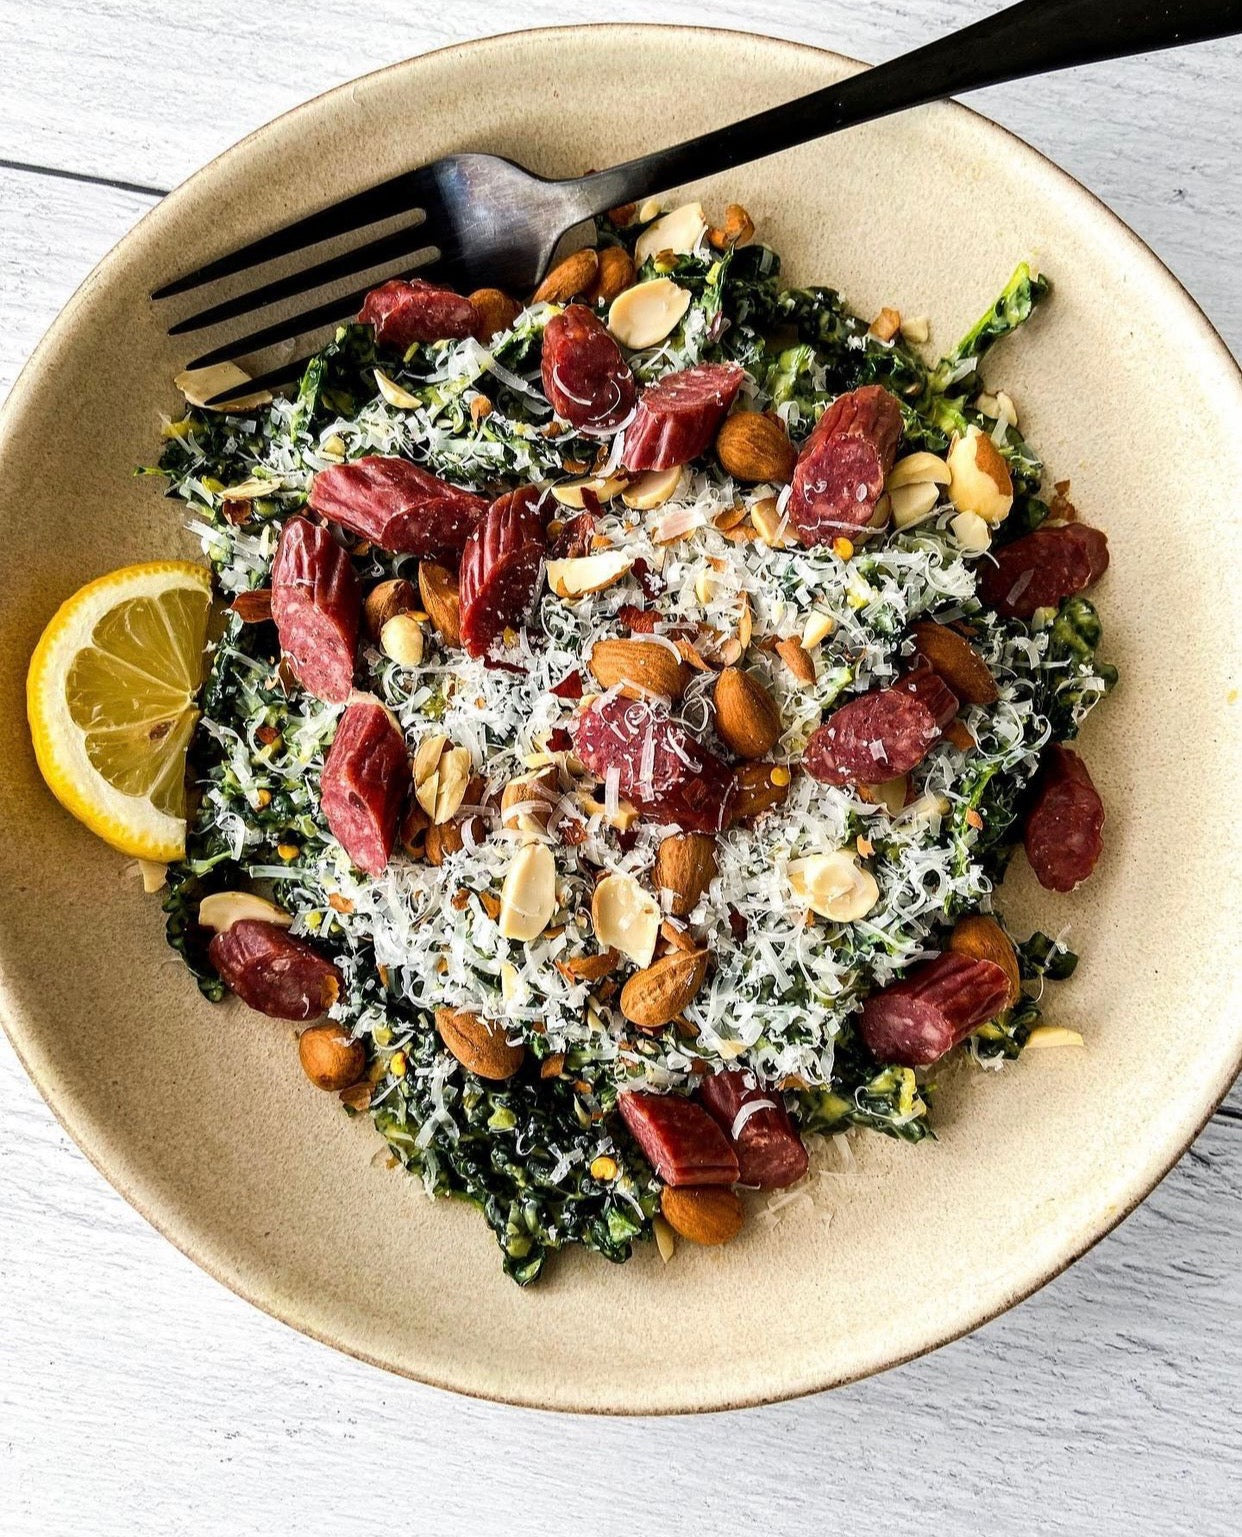 Gluten and Dairy Free Recipe: Kale Salad